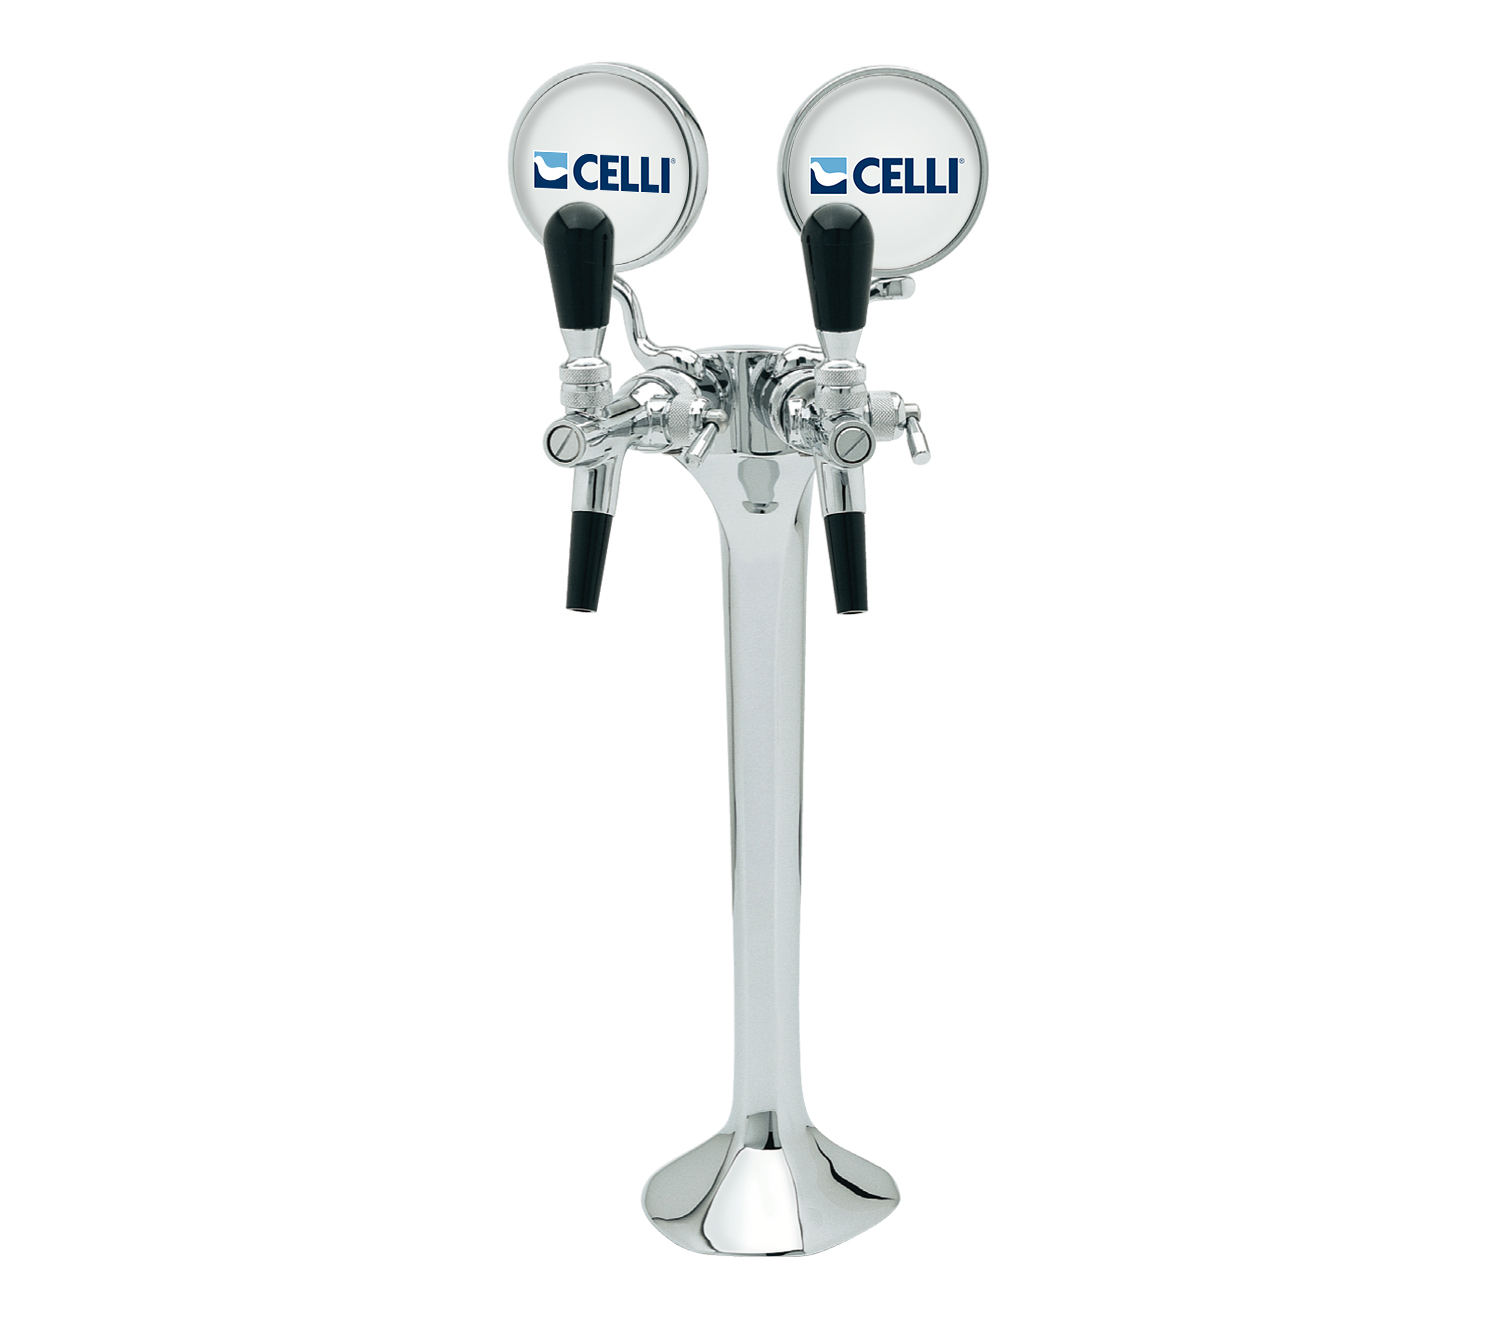 CELLI Cobra Classic 2 - Three way beer tower